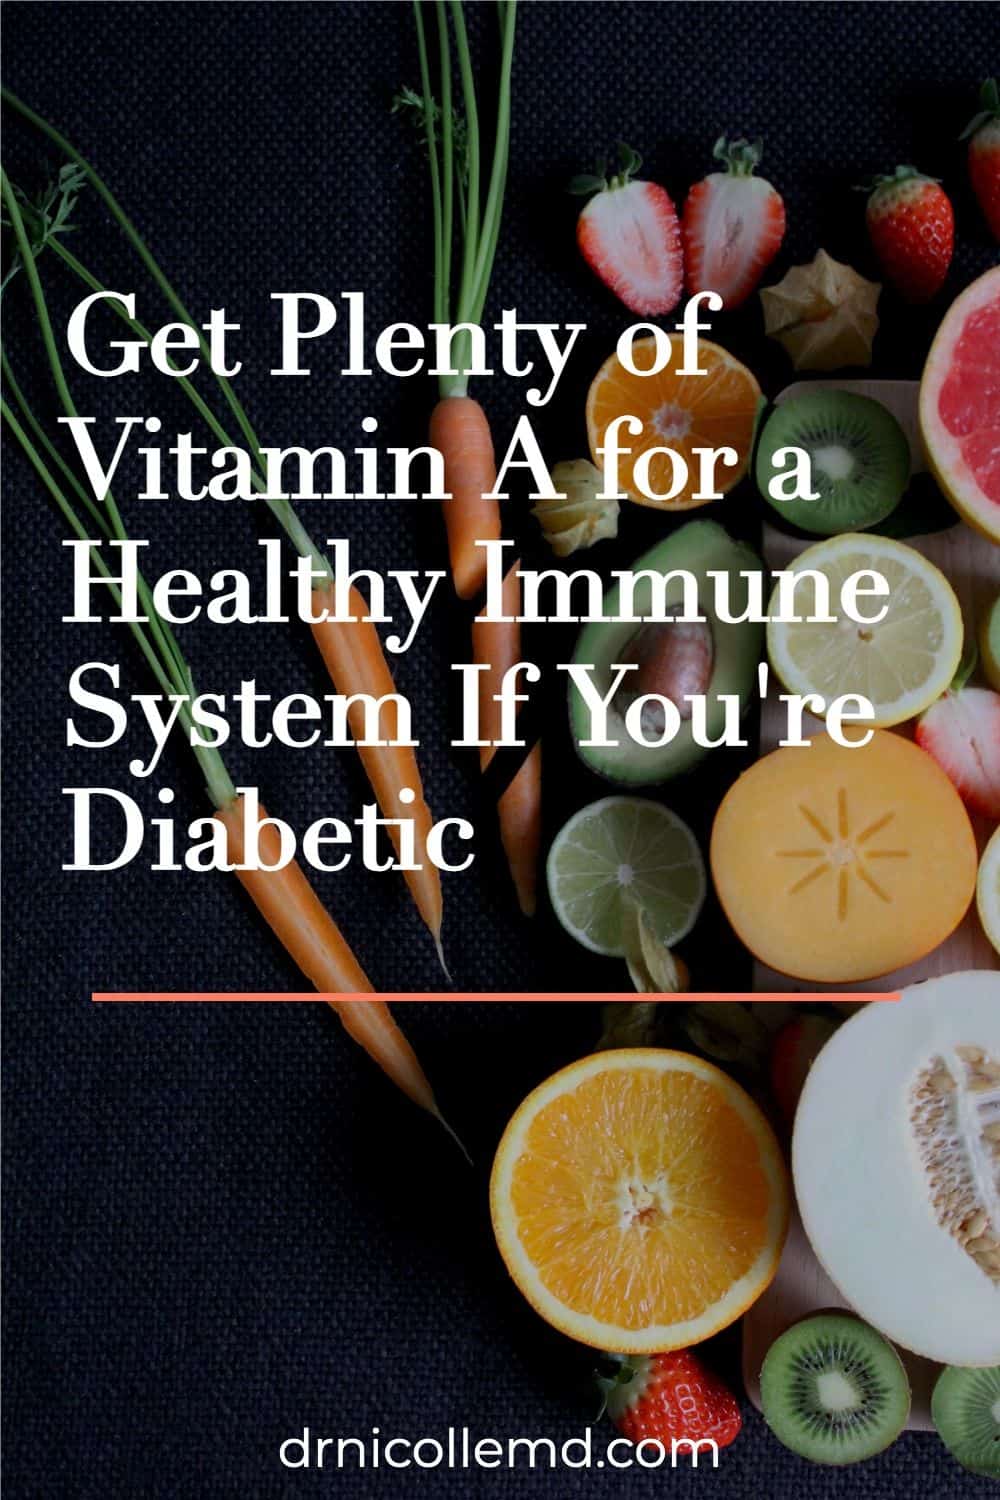 If You’re Diabetic Get Plenty of Vitamin A for a Healthy Immune System